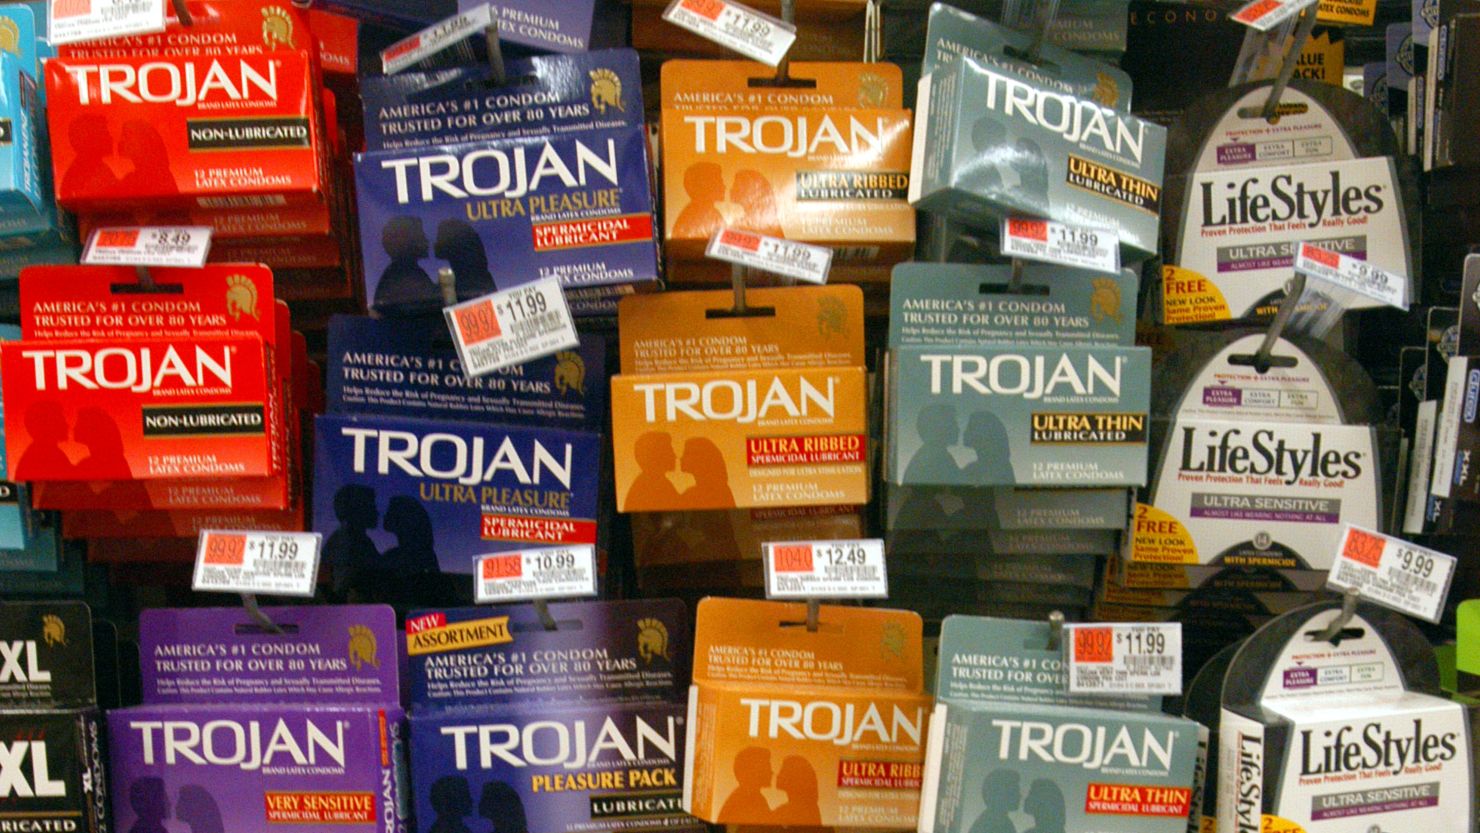 Gail Bolan says those who are sexually active should use condoms consistently and correctly.